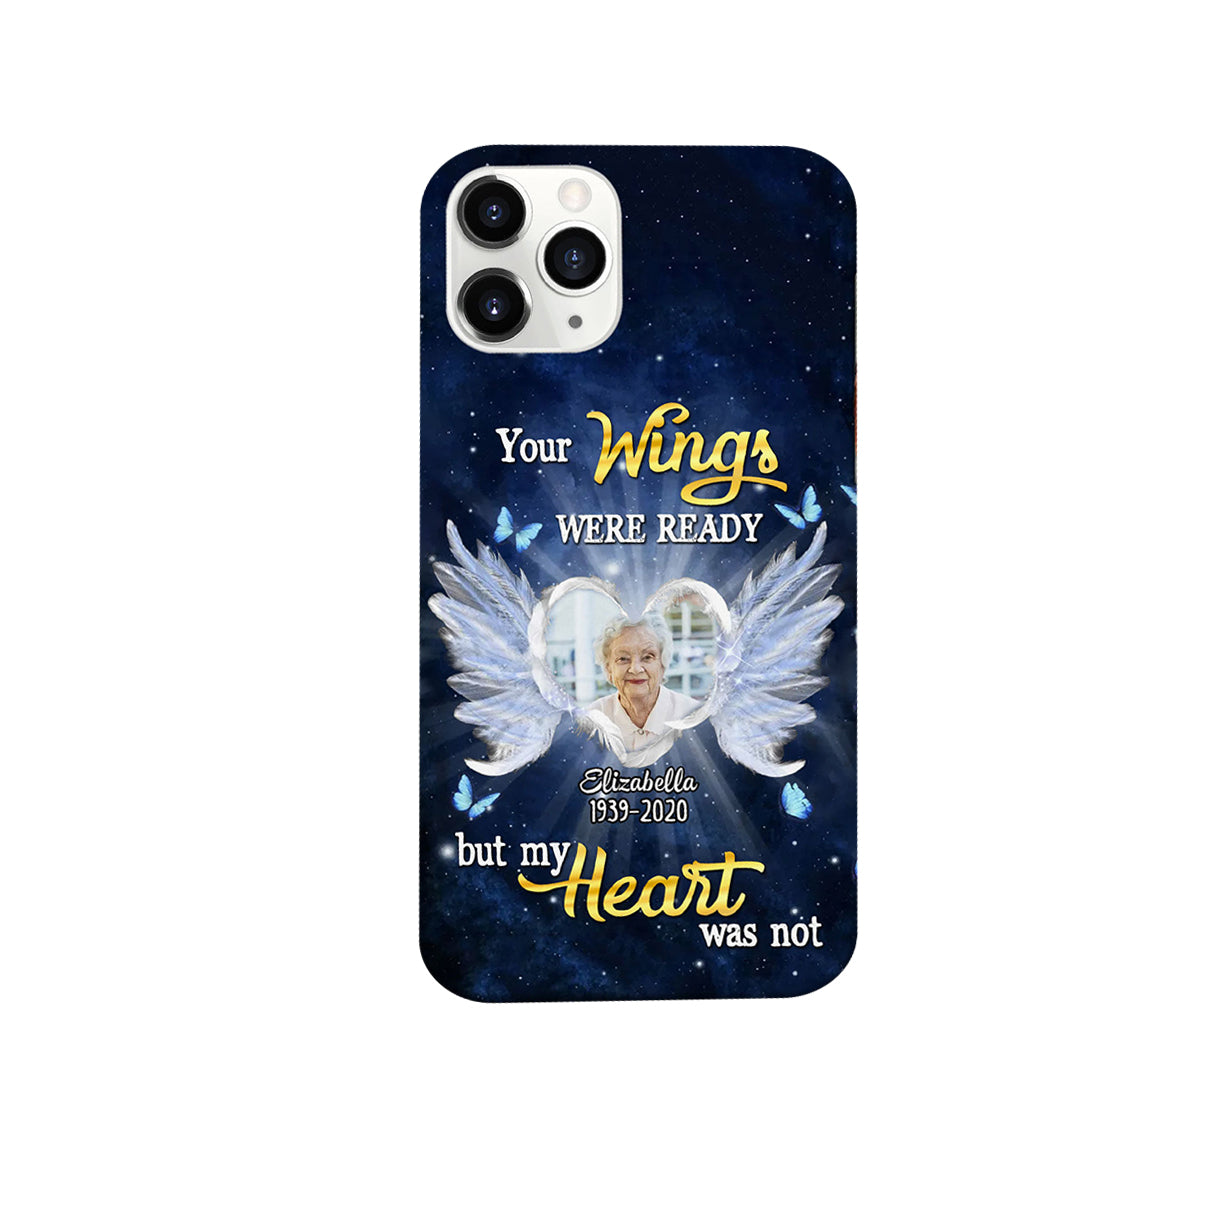 Personalized memorial phone case Your wings were ready but my heart was not